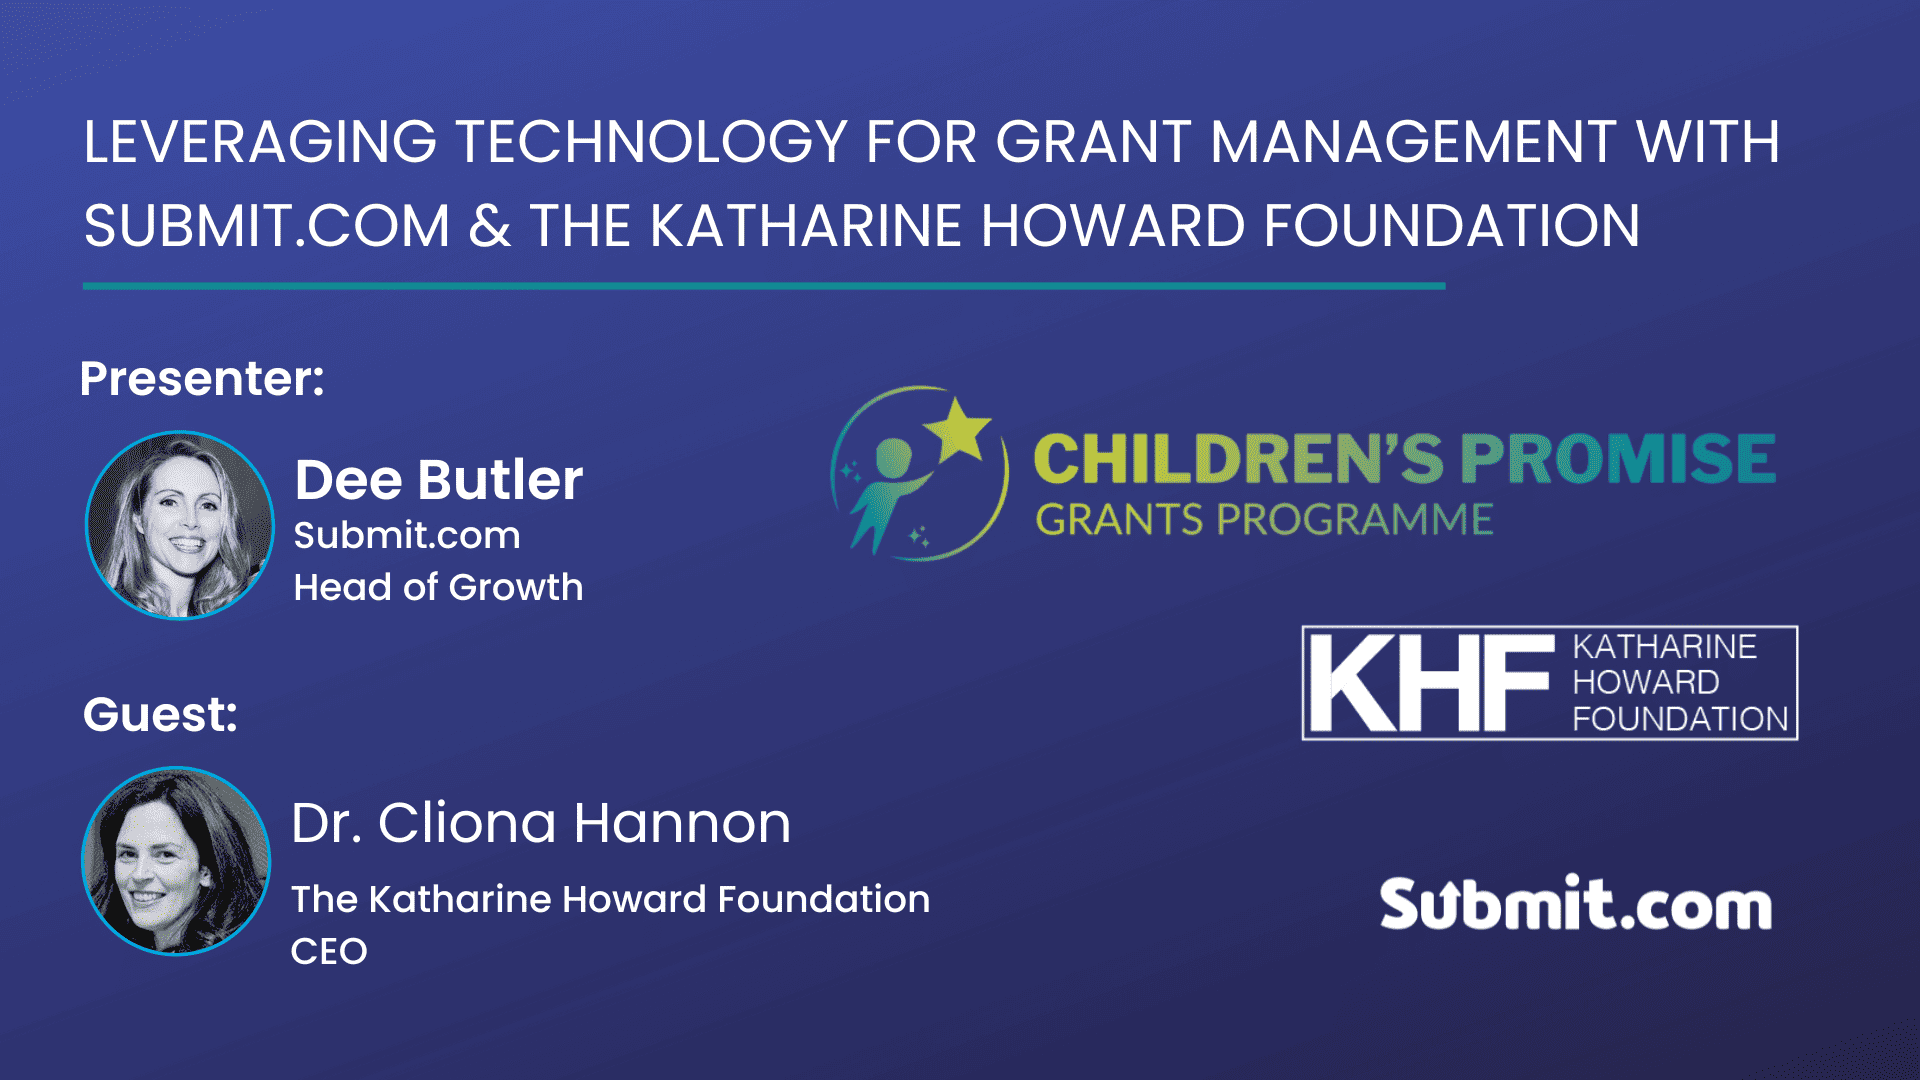 Leveraging technology for grant management with Submit.com & The Katharine Howard Foundation